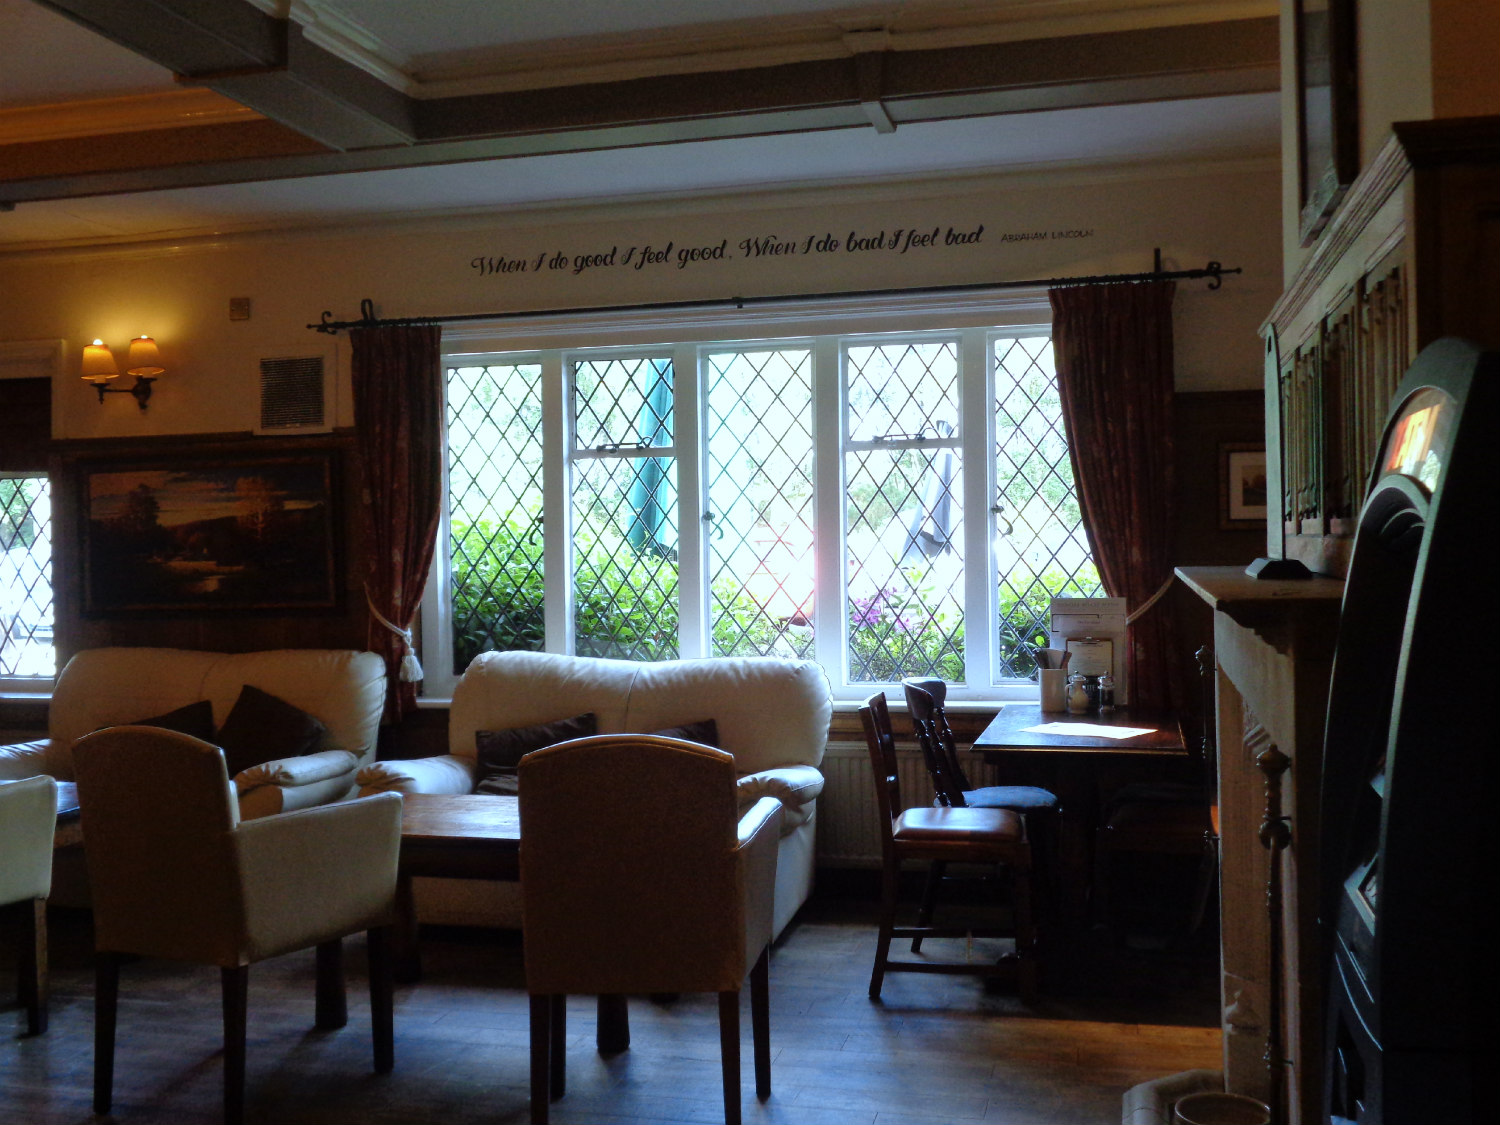 Restaurant Review: The Ely, Blackwater